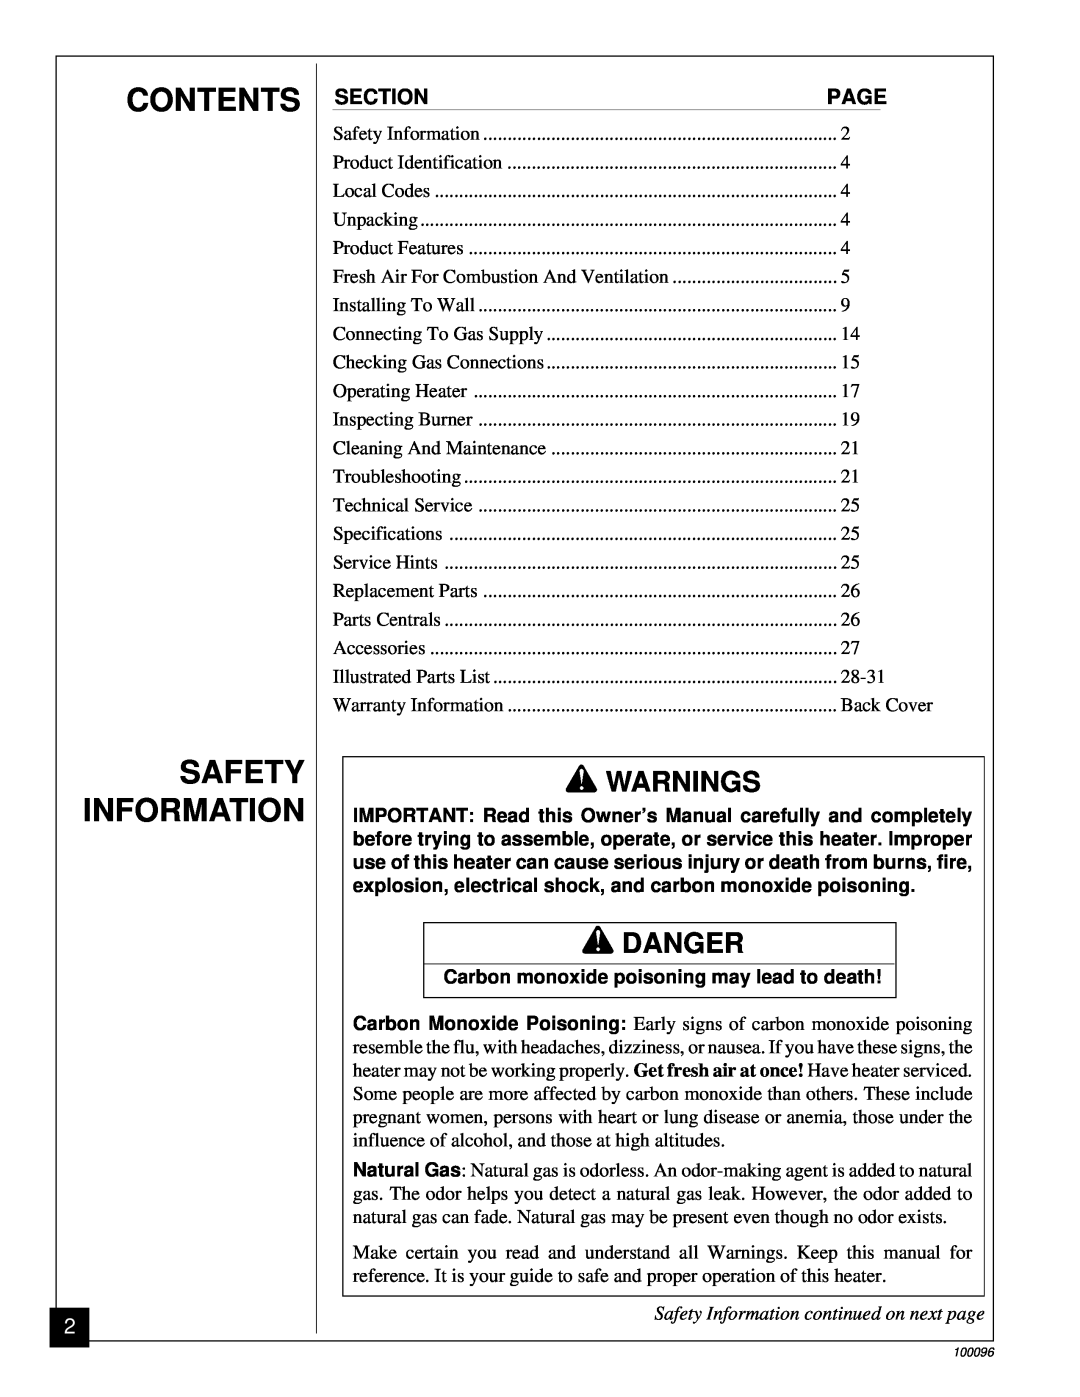 Desa CGN18B, RN30B Contents Safety Information, Warnings, Danger, Safety Information continued on next page 